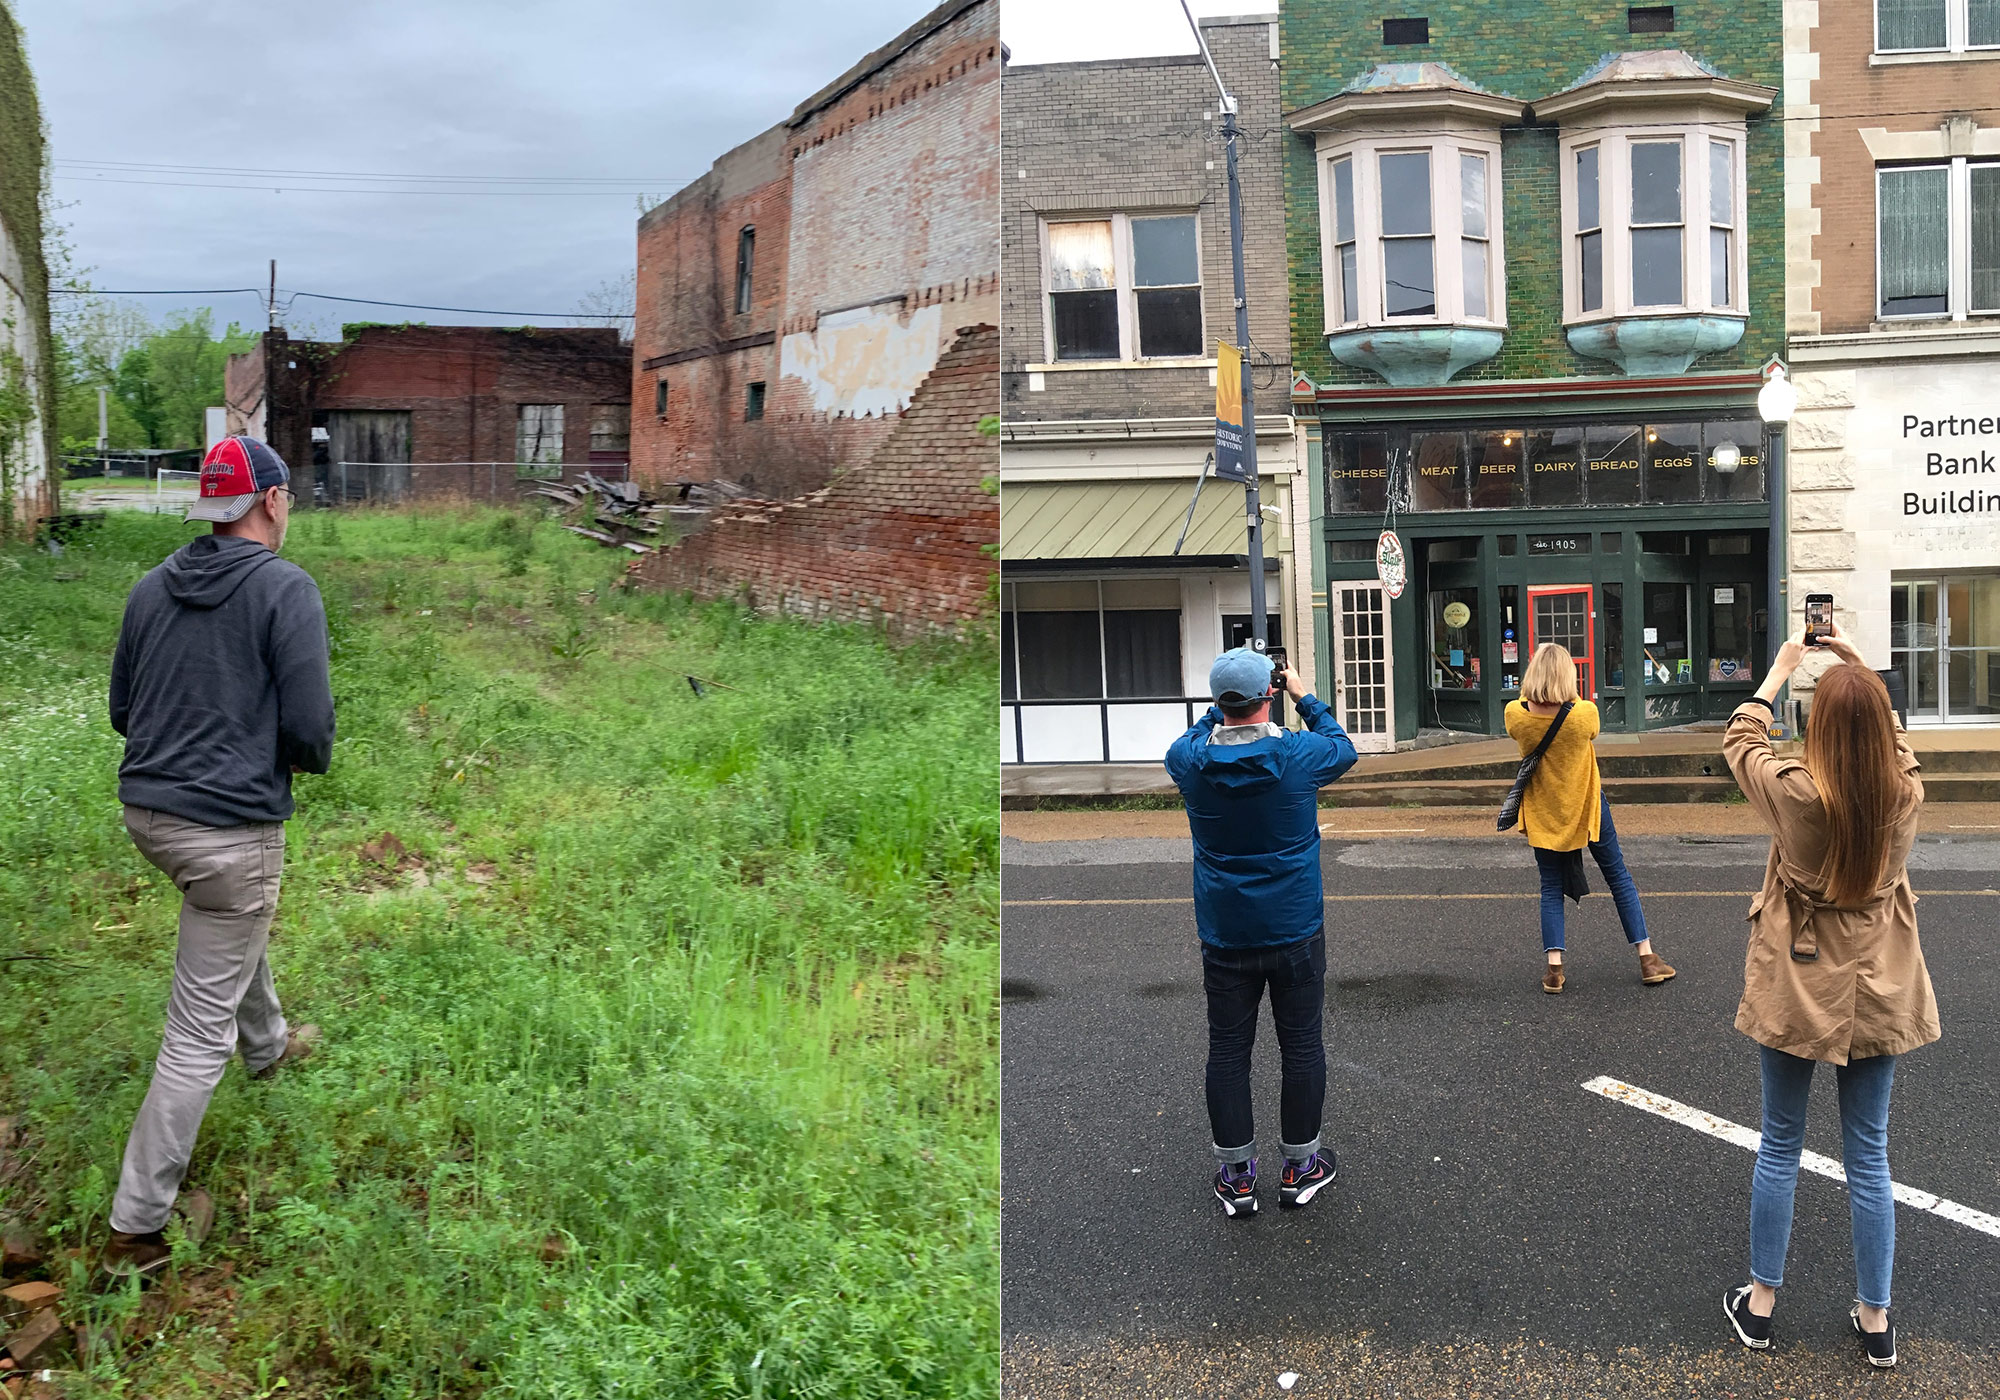 Exploring Helena, AR, for collaborations and community design opportunities.